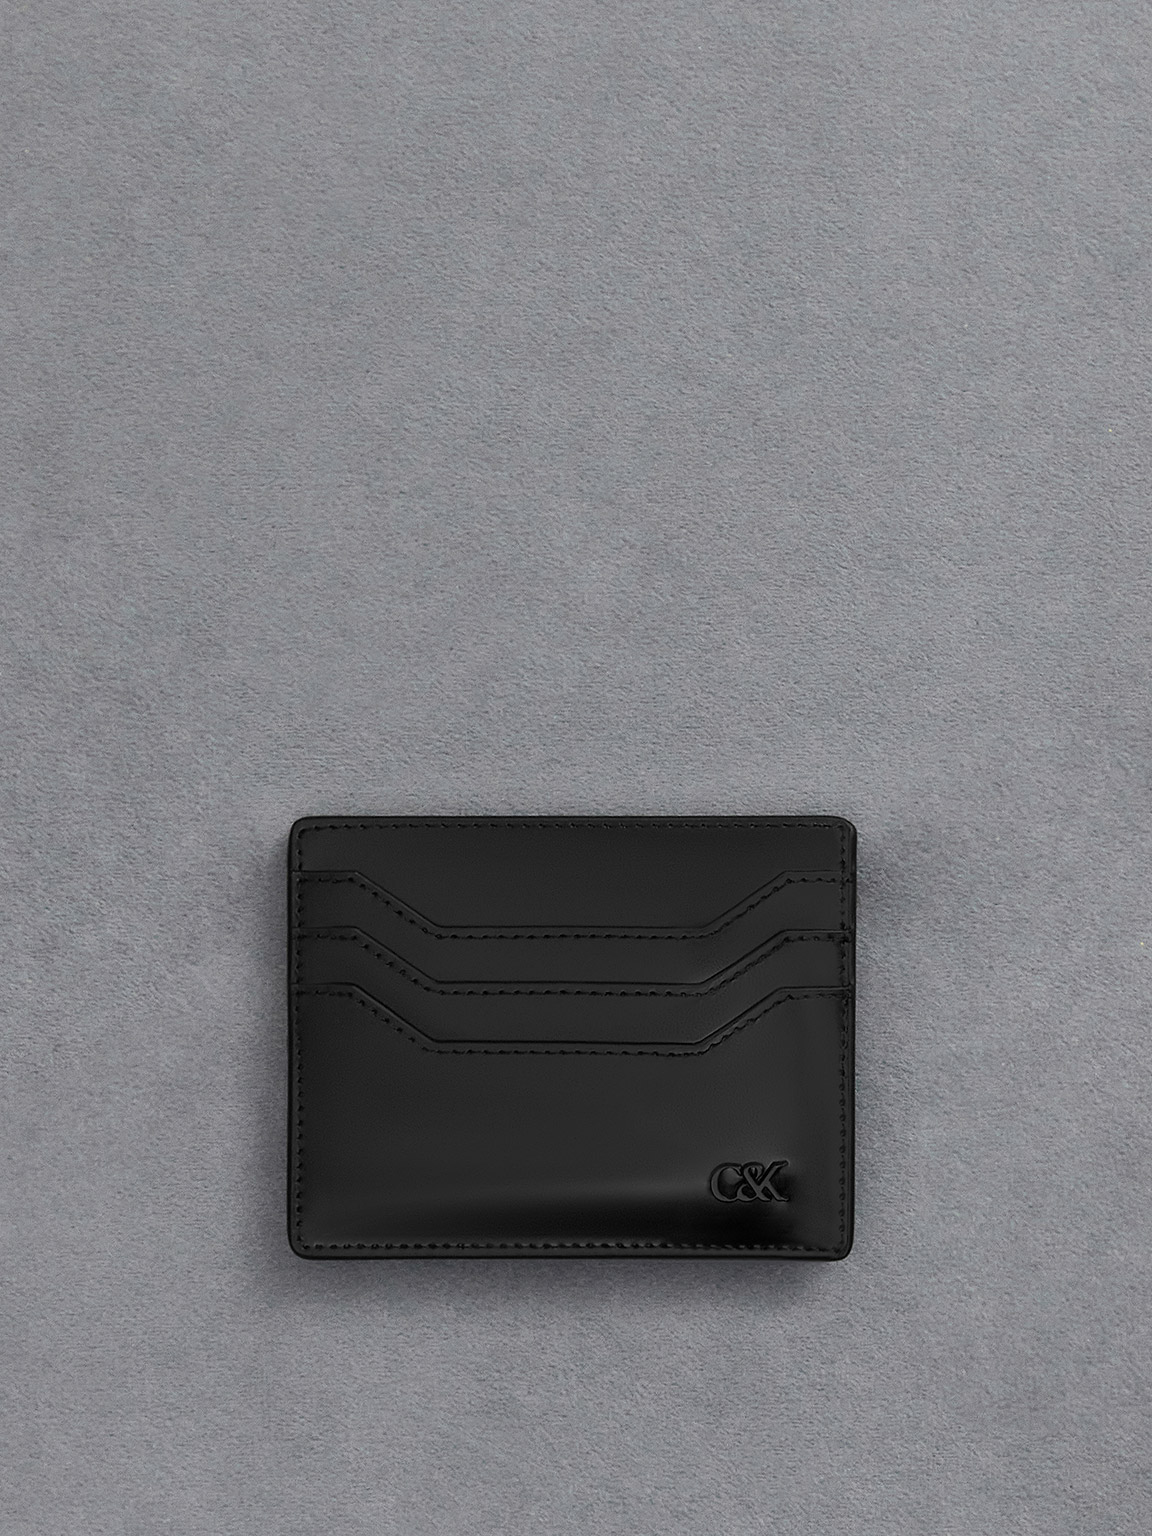 Charles & Keith Leather Multi-slot Card Holder In Black